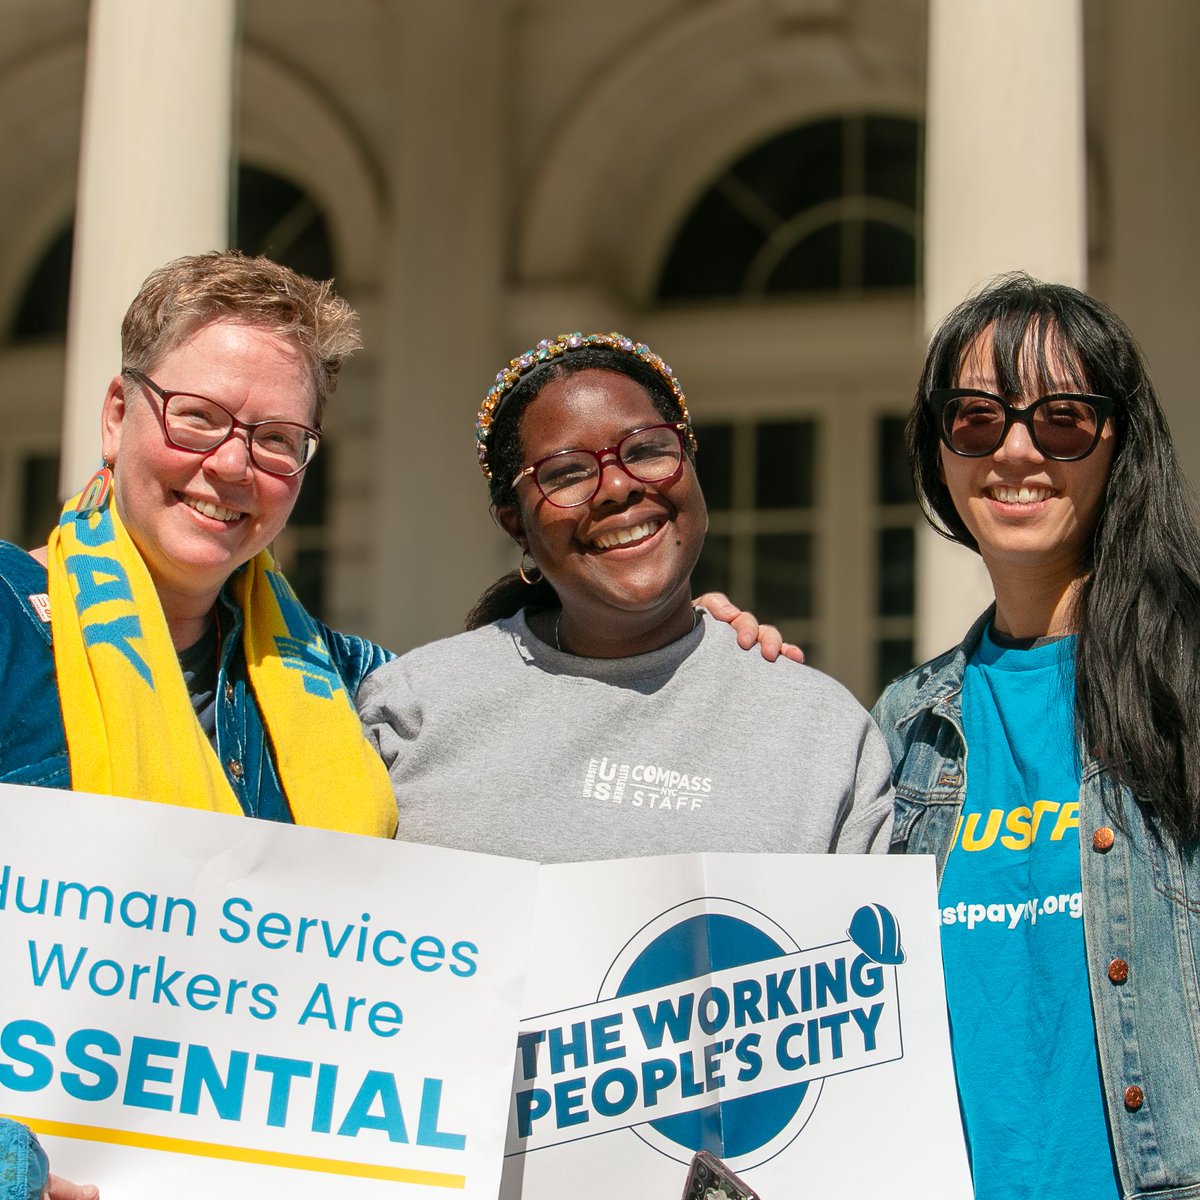 BIG NEWS: @NYCMayor announced that City-contracted human services workers will receive an over 9% wage increase over the next 3 years. This is a major win for #JustPay, and is the result of thousands of calls, emails and actions from human services workers!